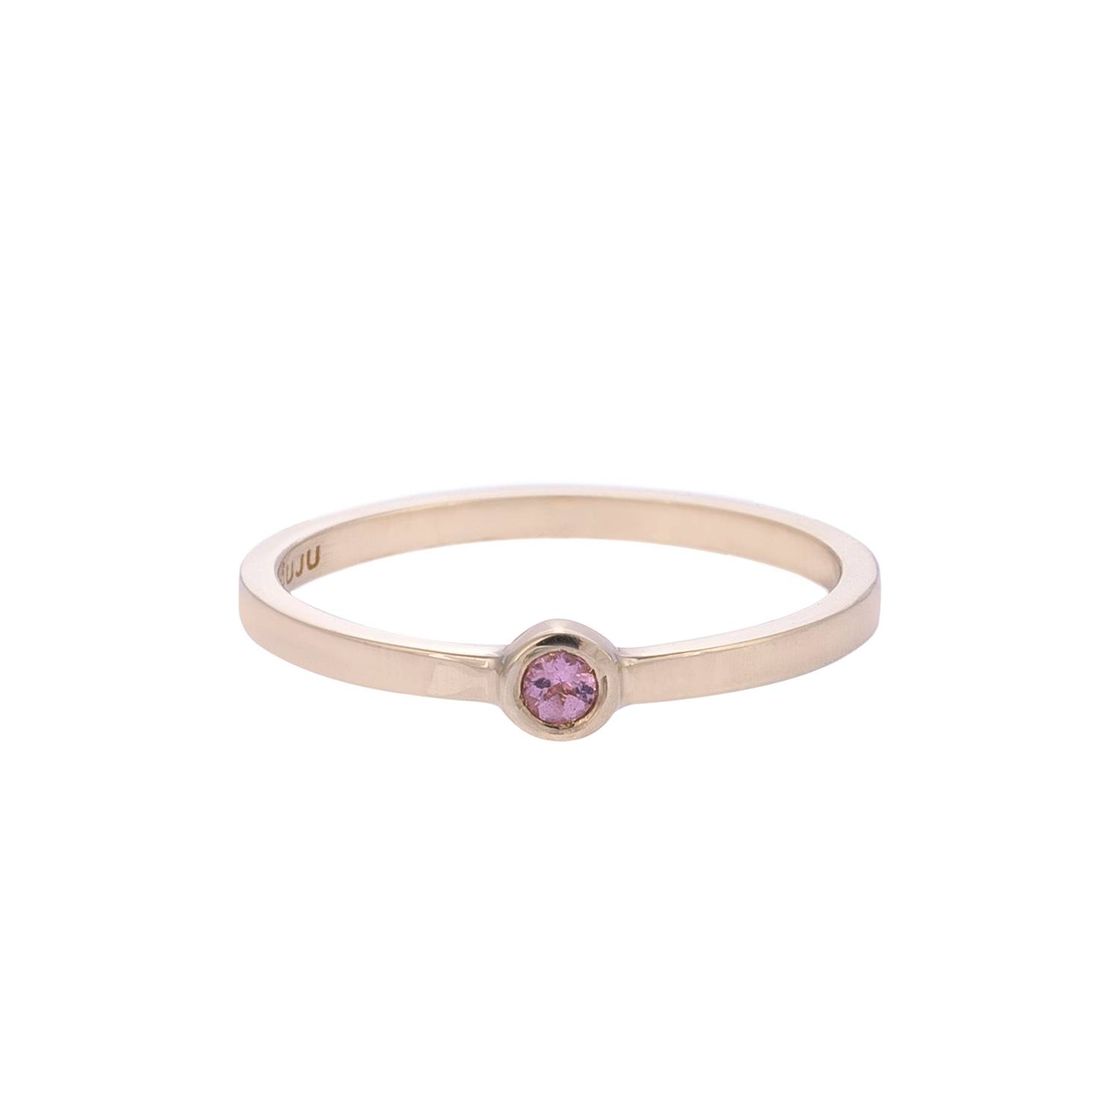 Chic Pink Gold Ring with Tourmaline Stones